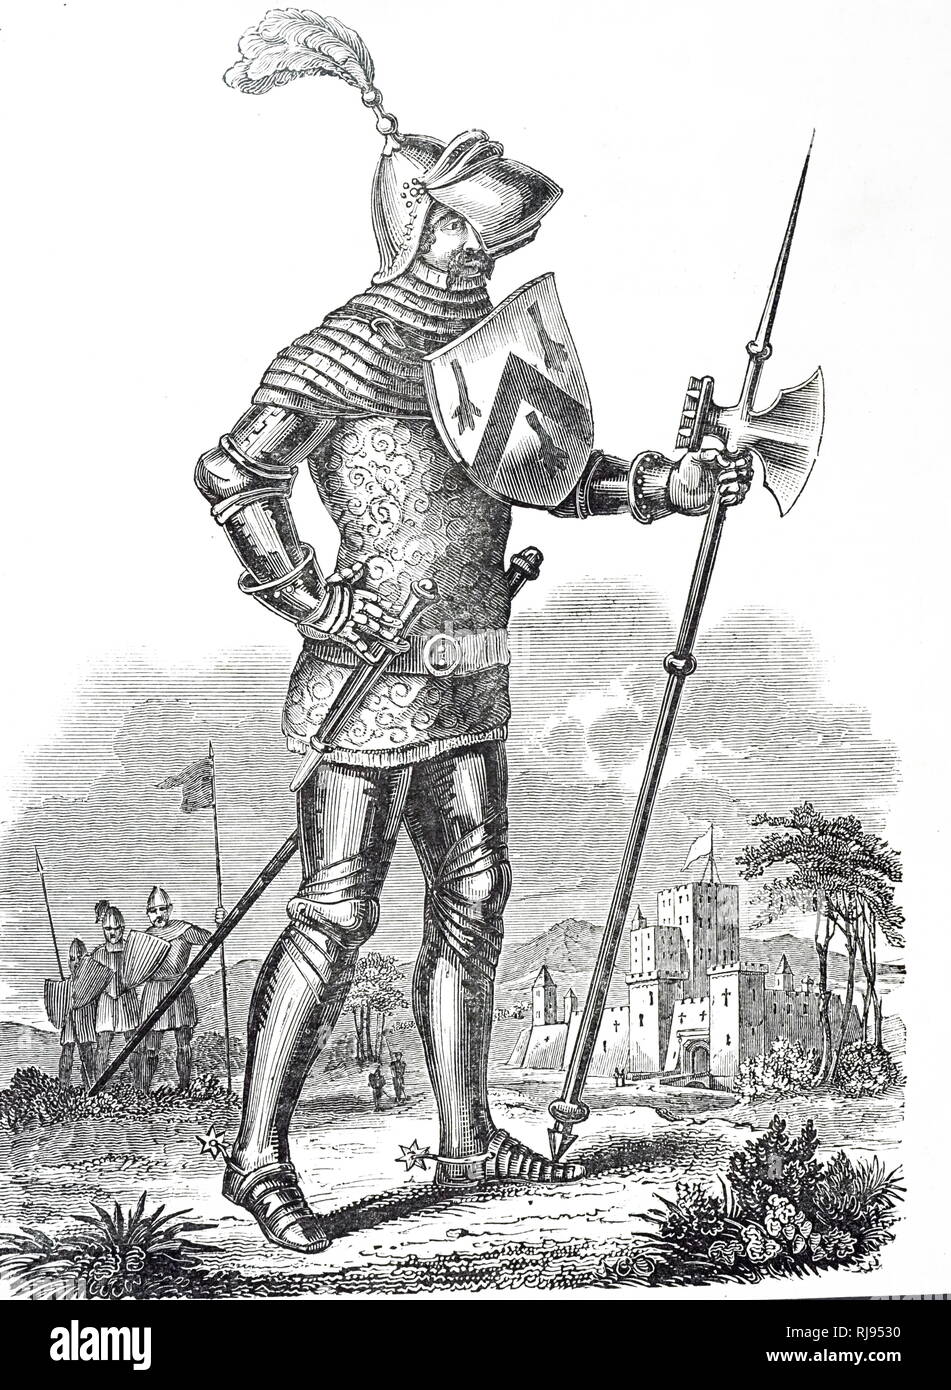 An engraving depicting an armoured knight at time of King Henry V (1413 ...